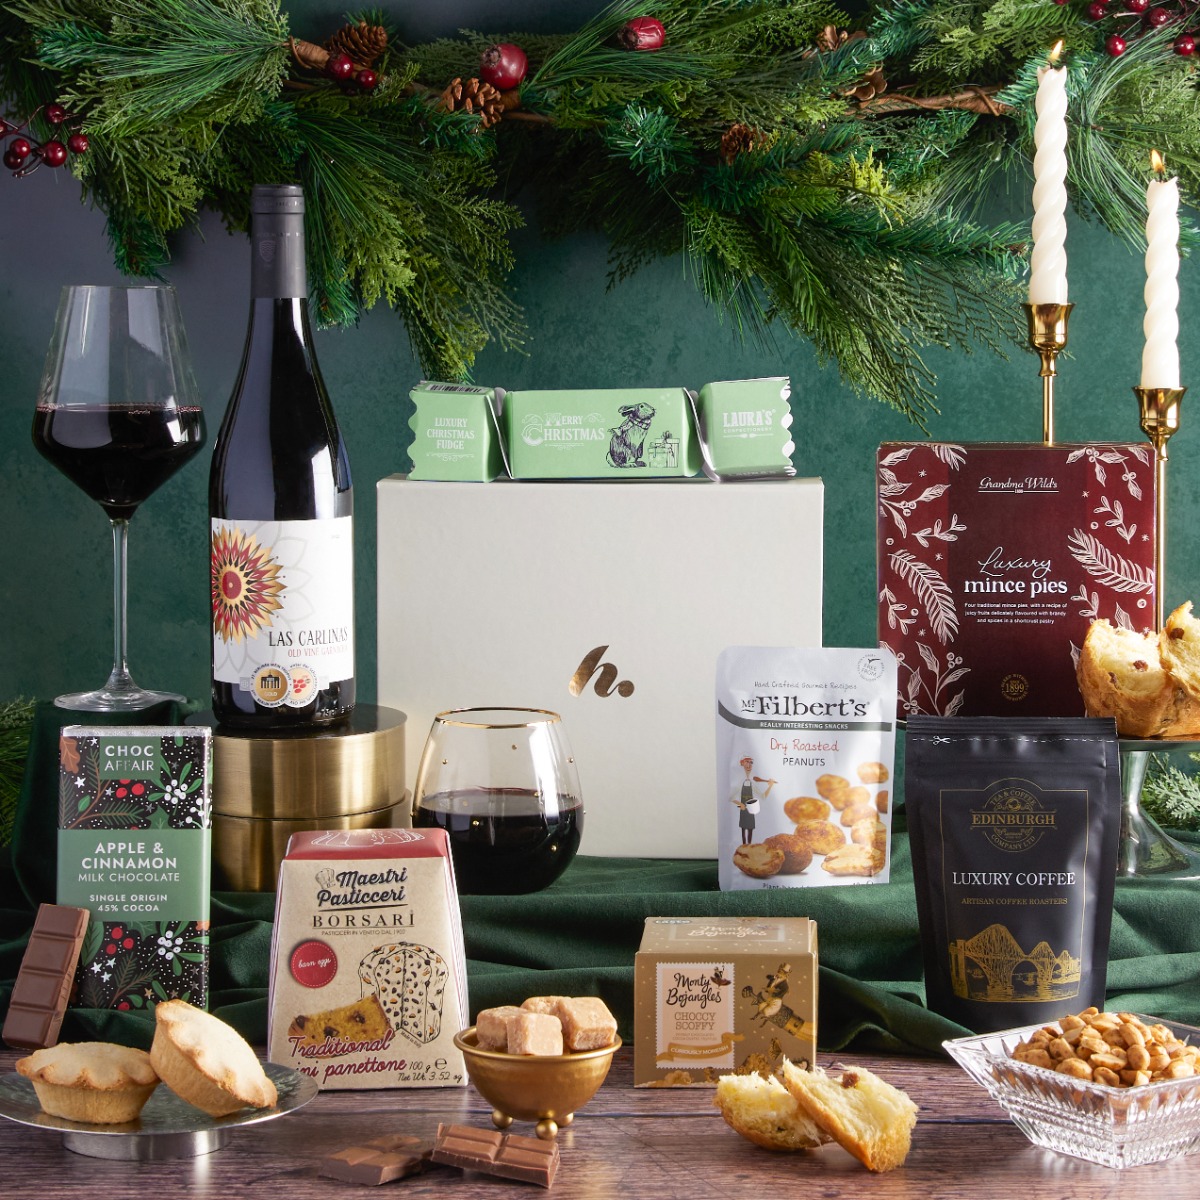  Christmas Cracker Hamper with contents on display